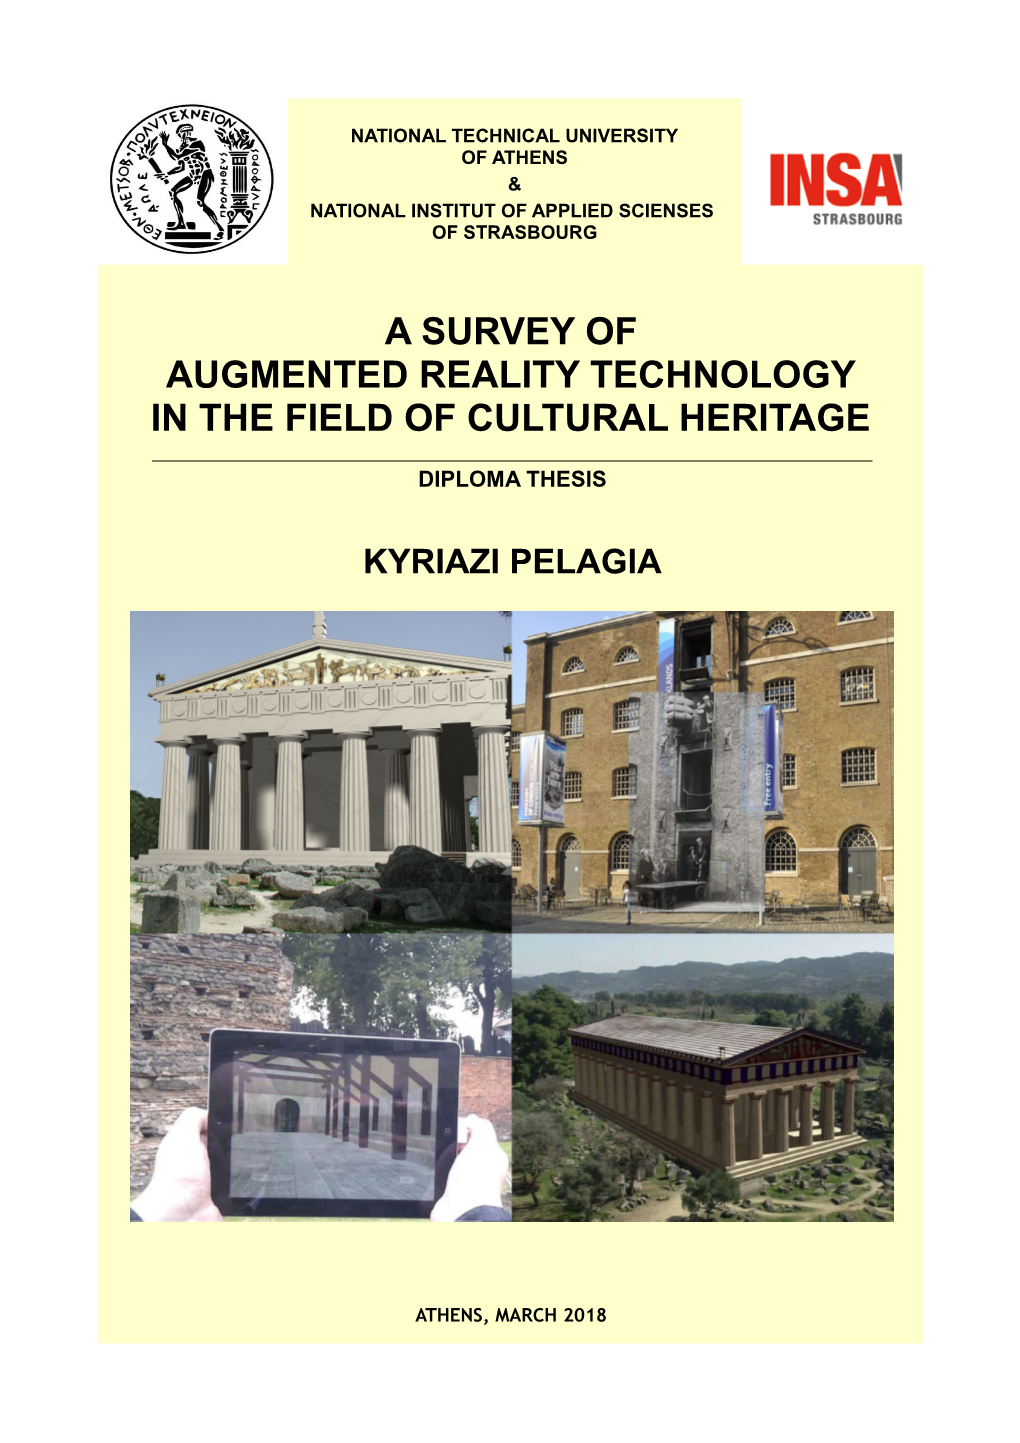 A Survey of Augmented Reality Technology in the Field of Cultural Heritage